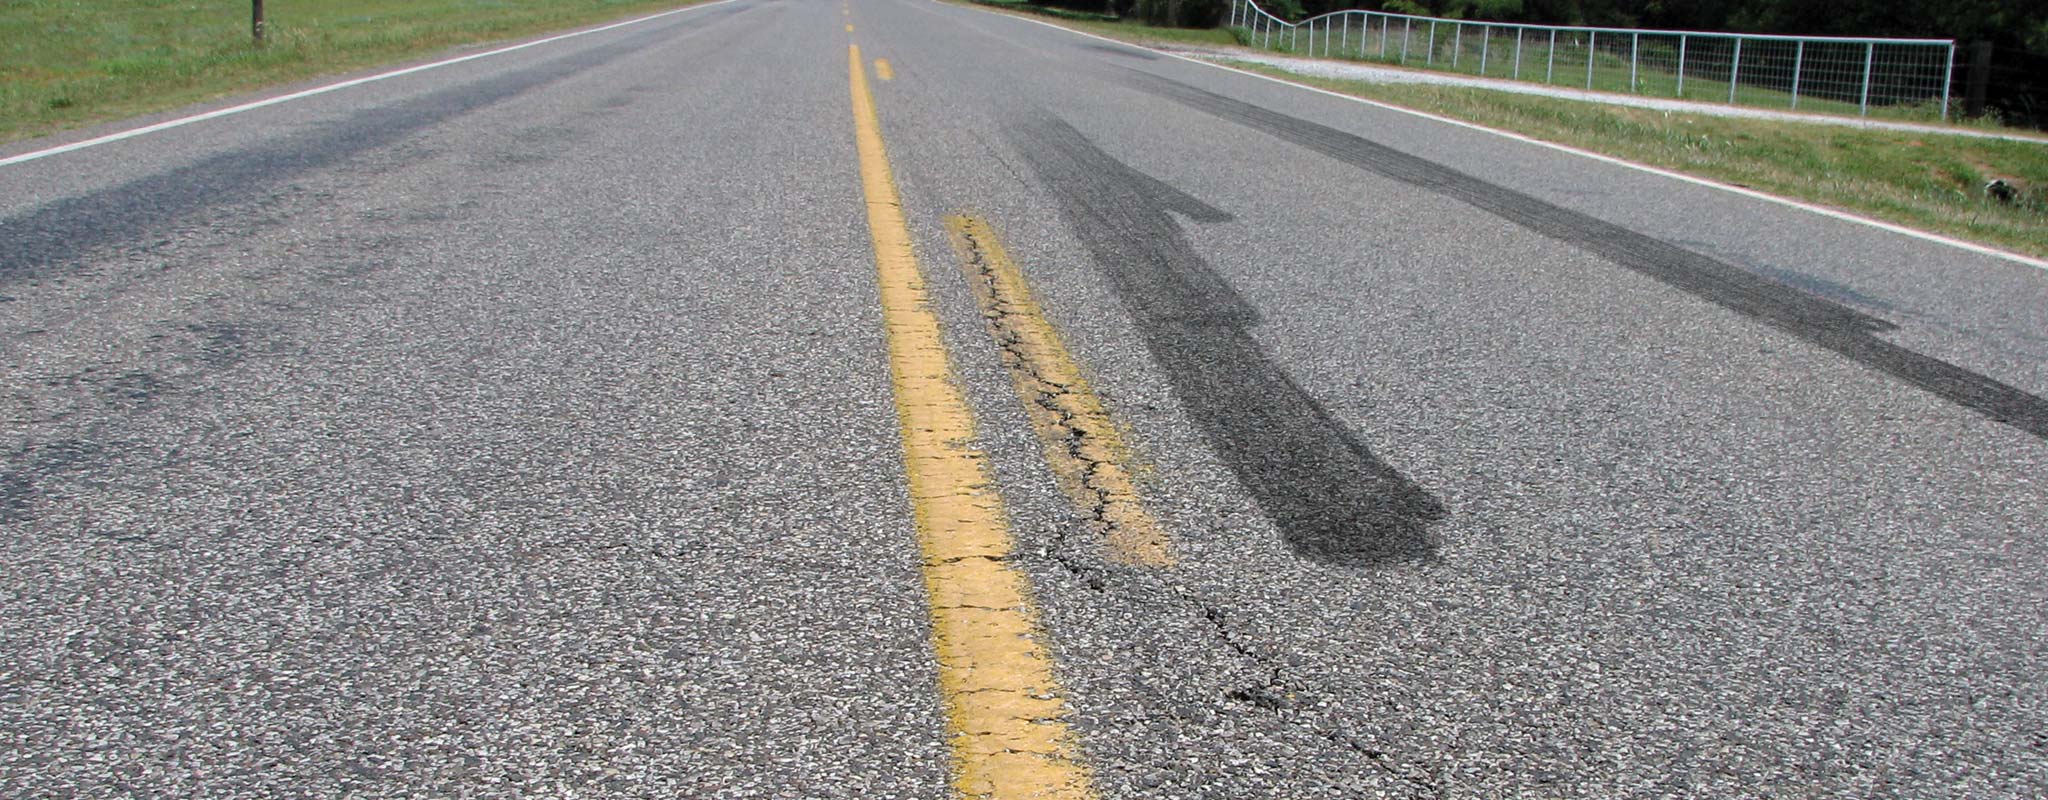 Tire skid marks on a rural road.